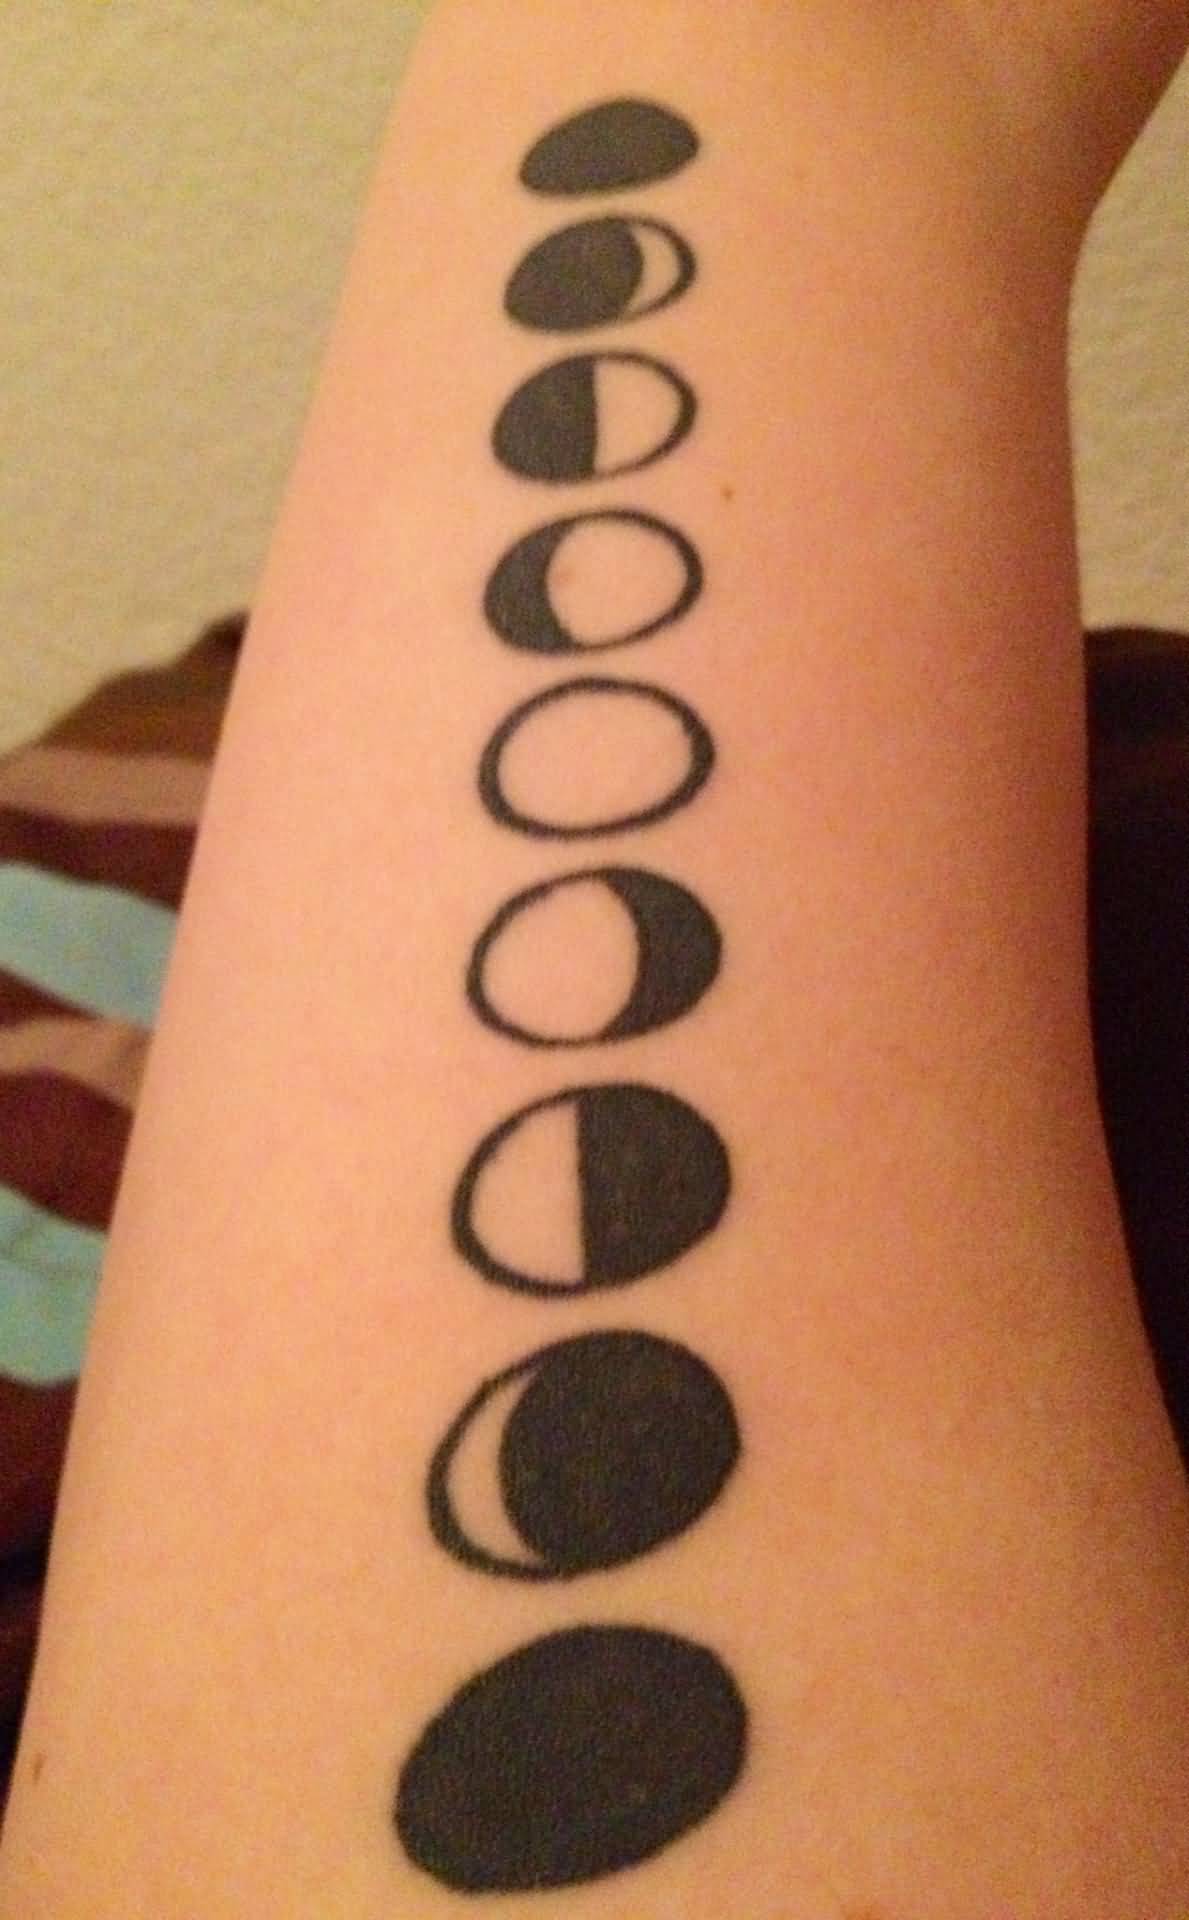 Black Phases Of The Moon Tattoo Design For Arm